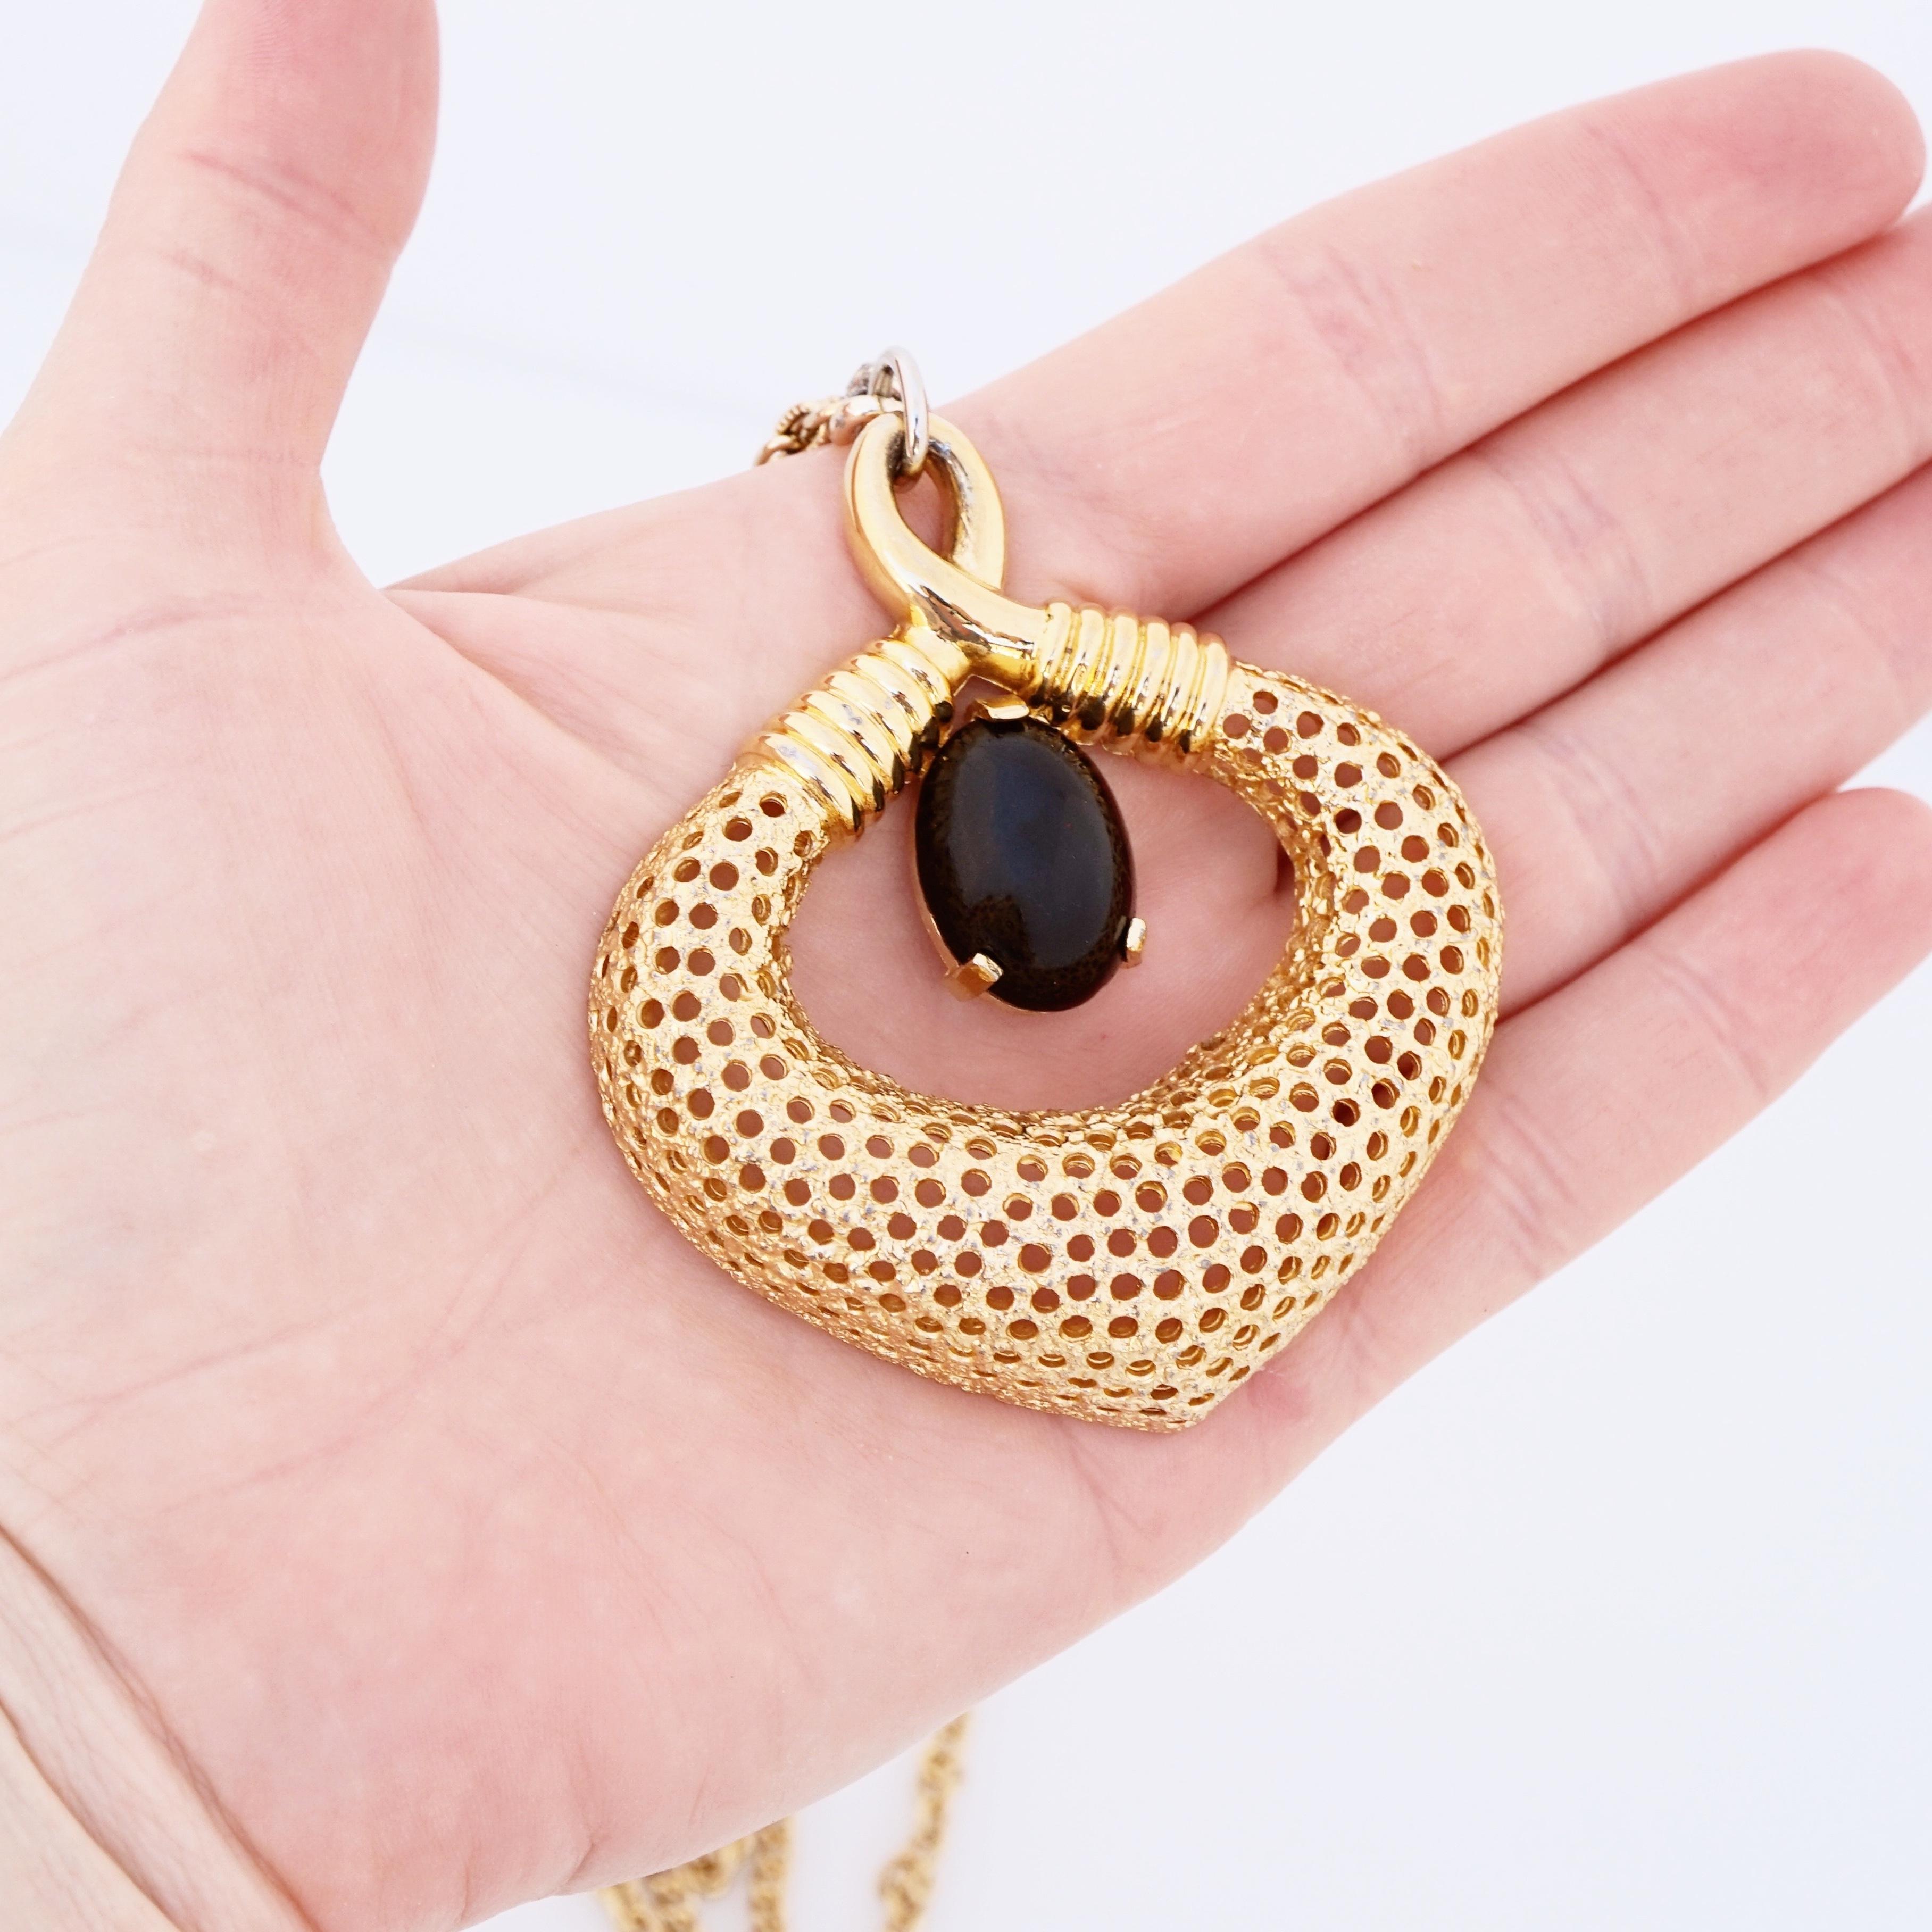 Gold Mod Pendant Statement Necklace With Onyx Cabochon By Jomaz, 1970s For Sale 1